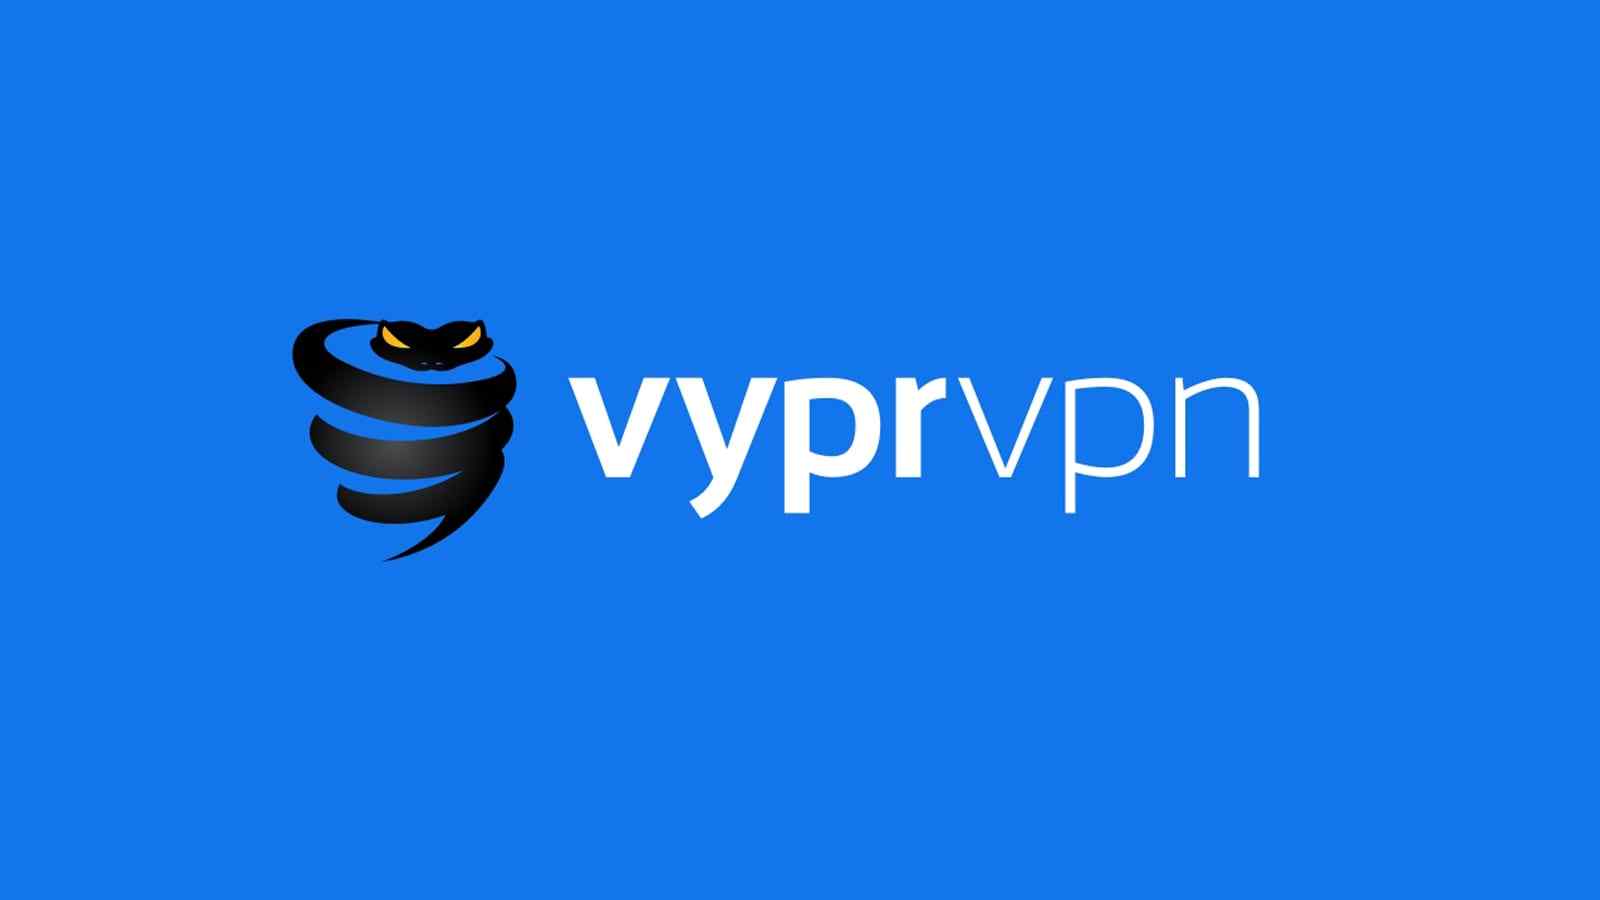 VyprVPN is a virtual private network (VPN) service based in Switzerland.